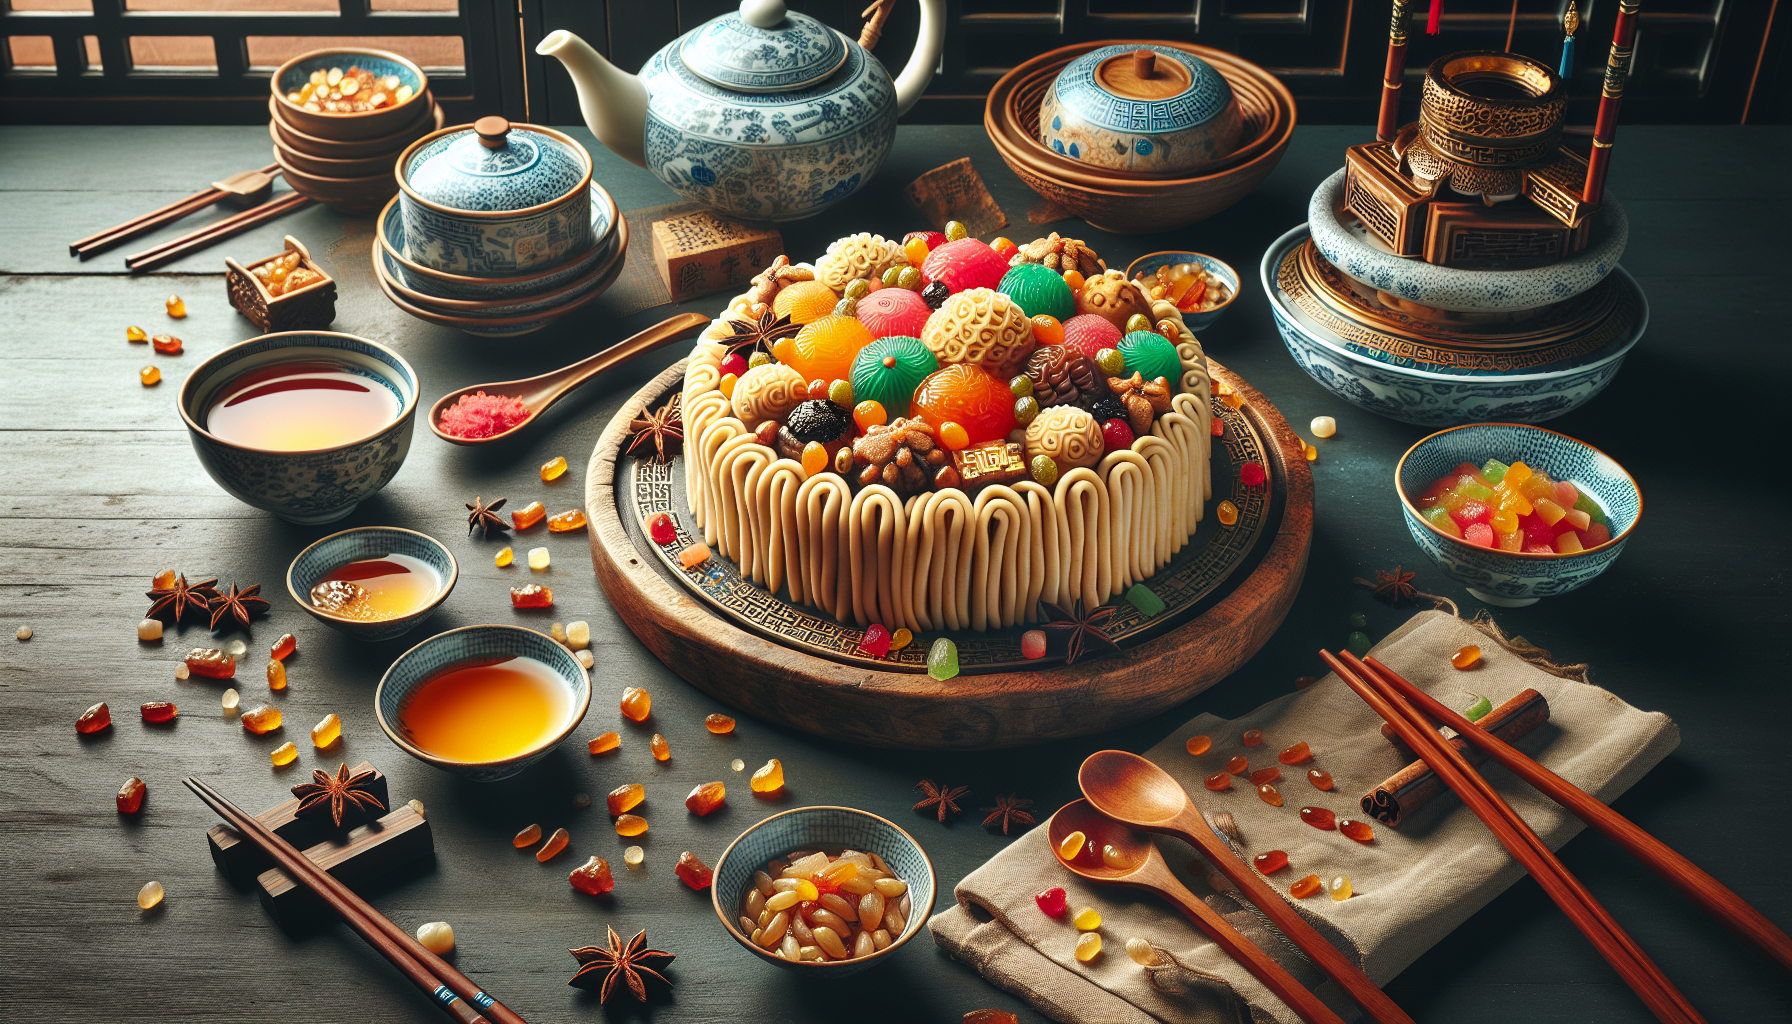 can you suggest a chinese dessert thats unique and not commonly known 2